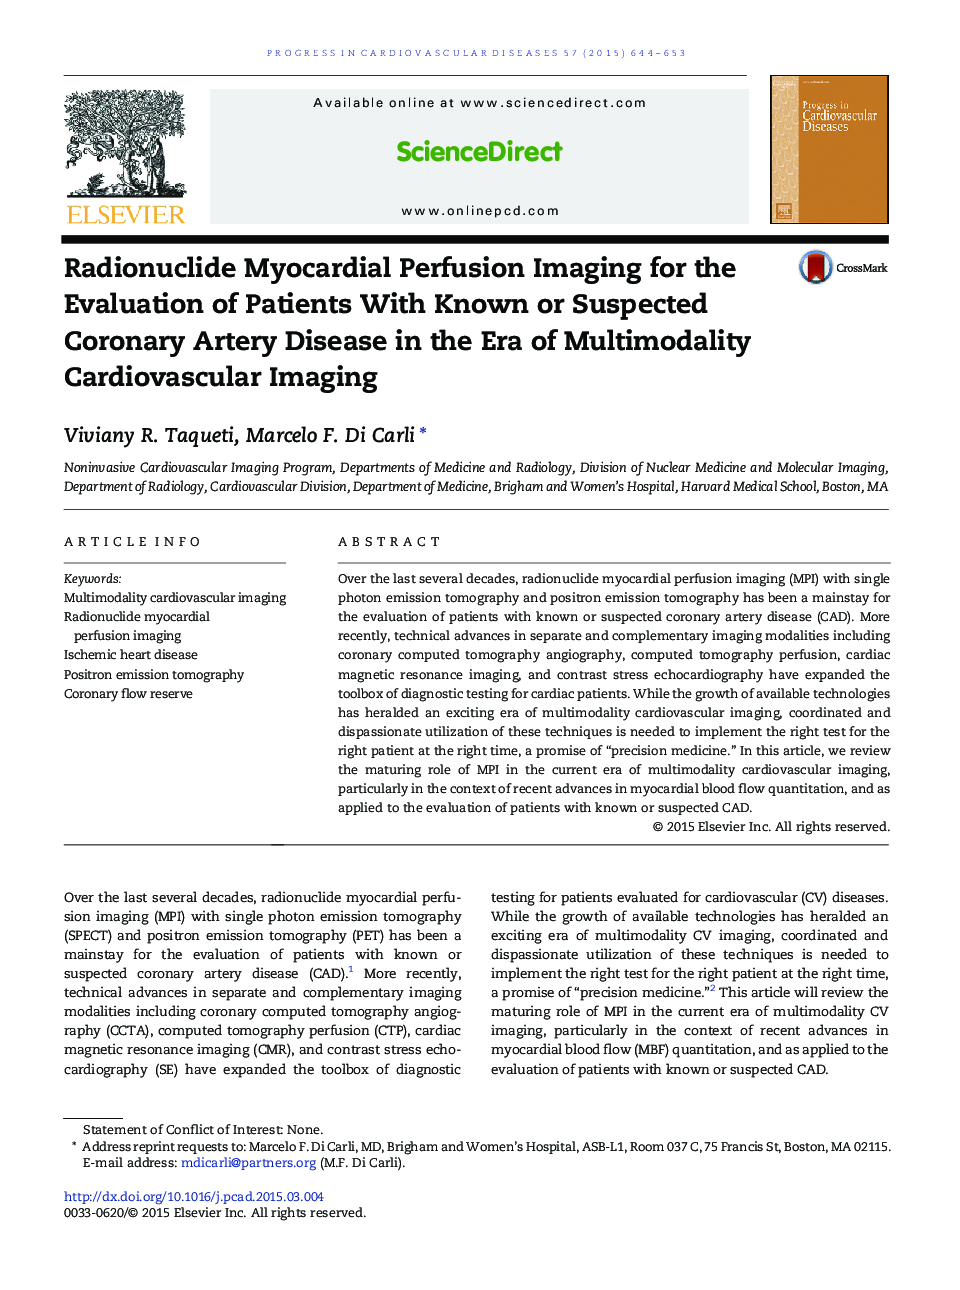 Radionuclide Myocardial Perfusion Imaging for the Evaluation of Patients With Known or Suspected Coronary Artery Disease in the Era of Multimodality Cardiovascular Imaging 